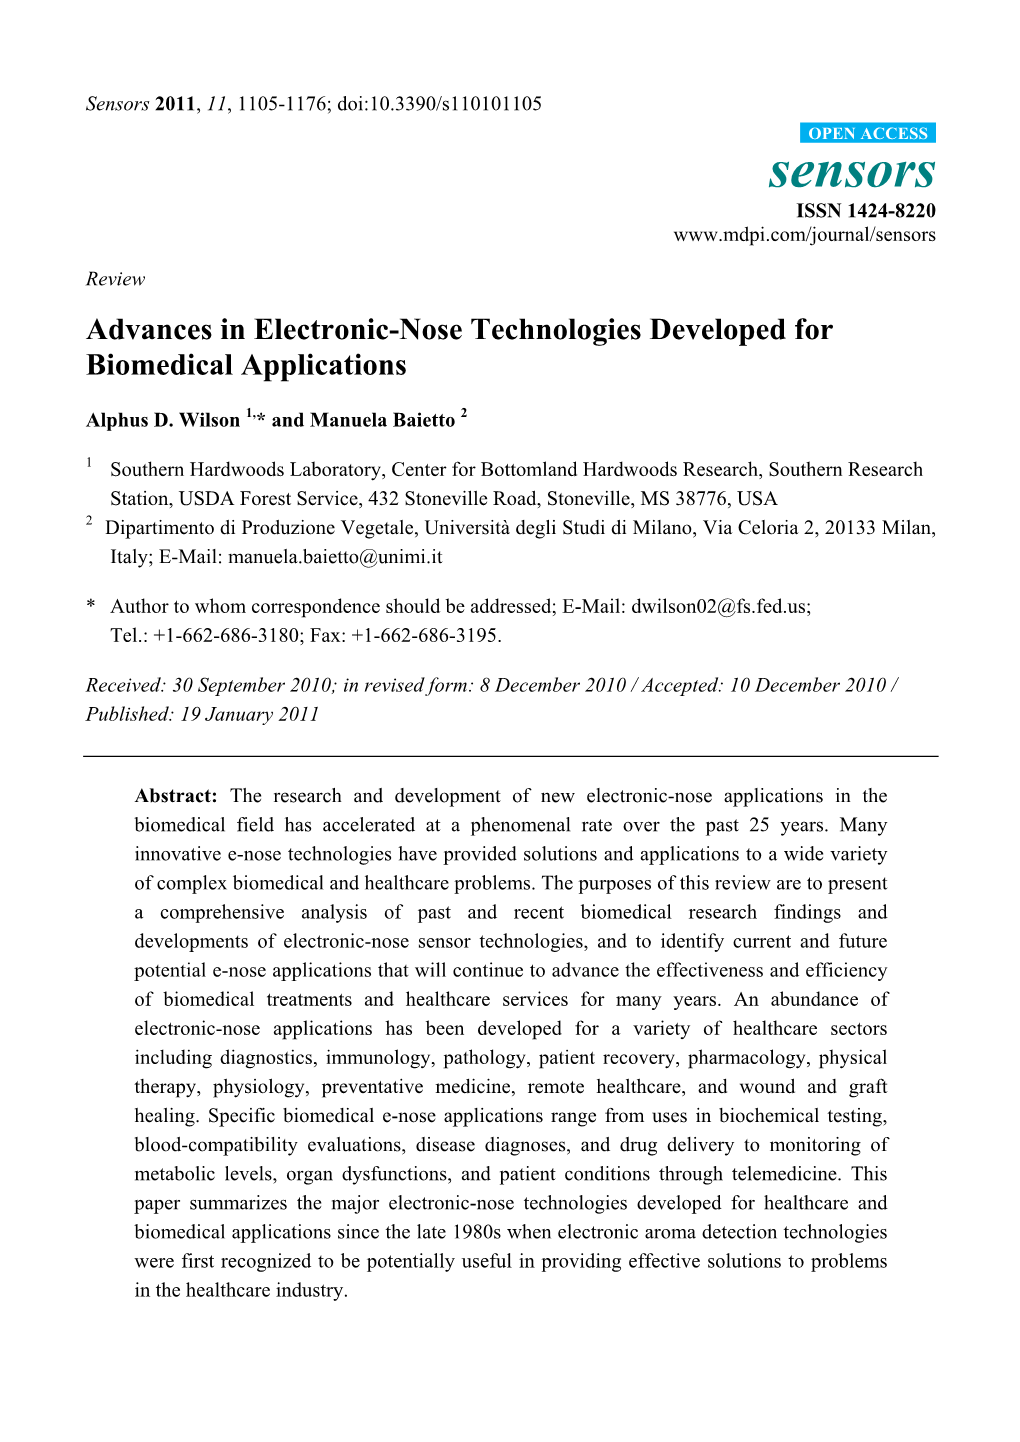 Advances in Electronic-Nose Technologies Developed for Biomedical Applications